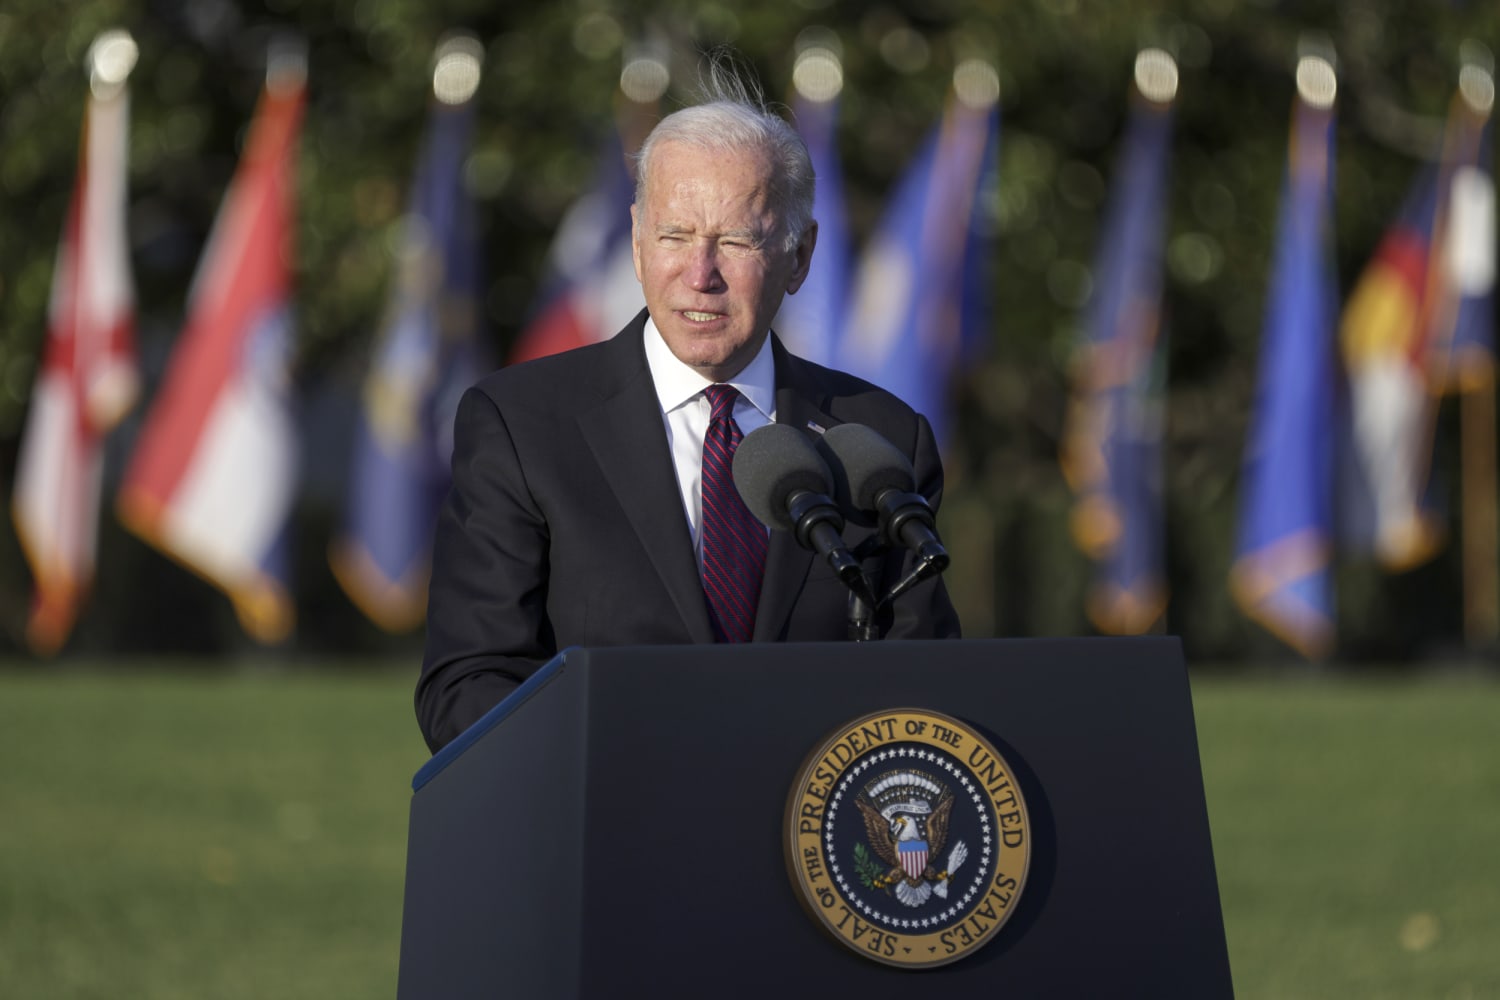 Biden sells infrastructure law in visit to ‘structurally deficient’ New Hampshire bridge